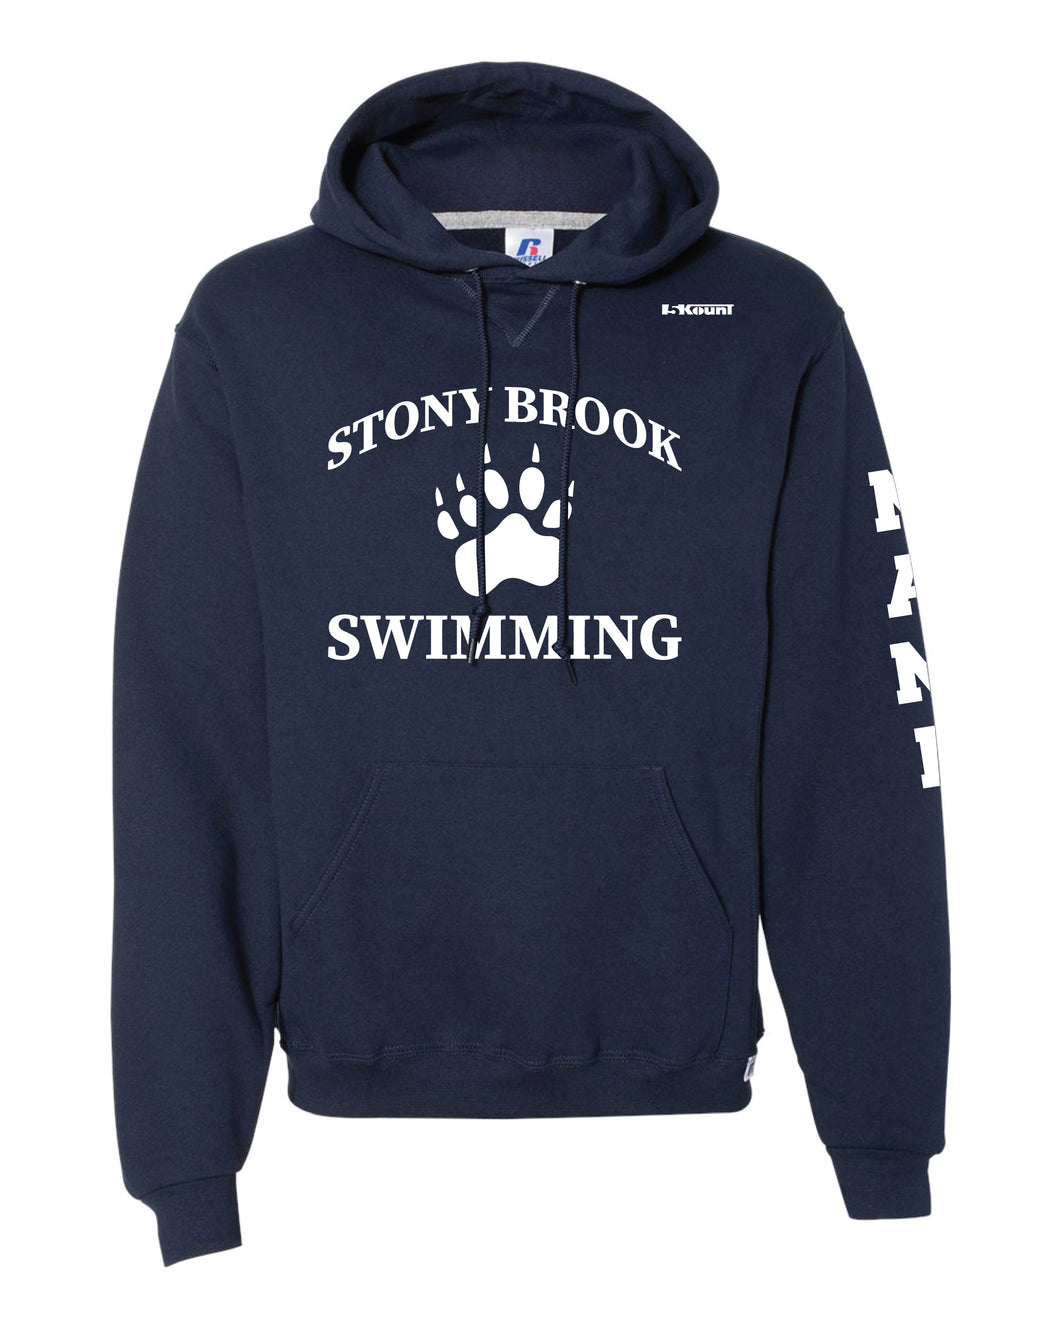 Stony Brook Swimming Russell Athletic Cotton Hoodie - Navy - 5KounT2018